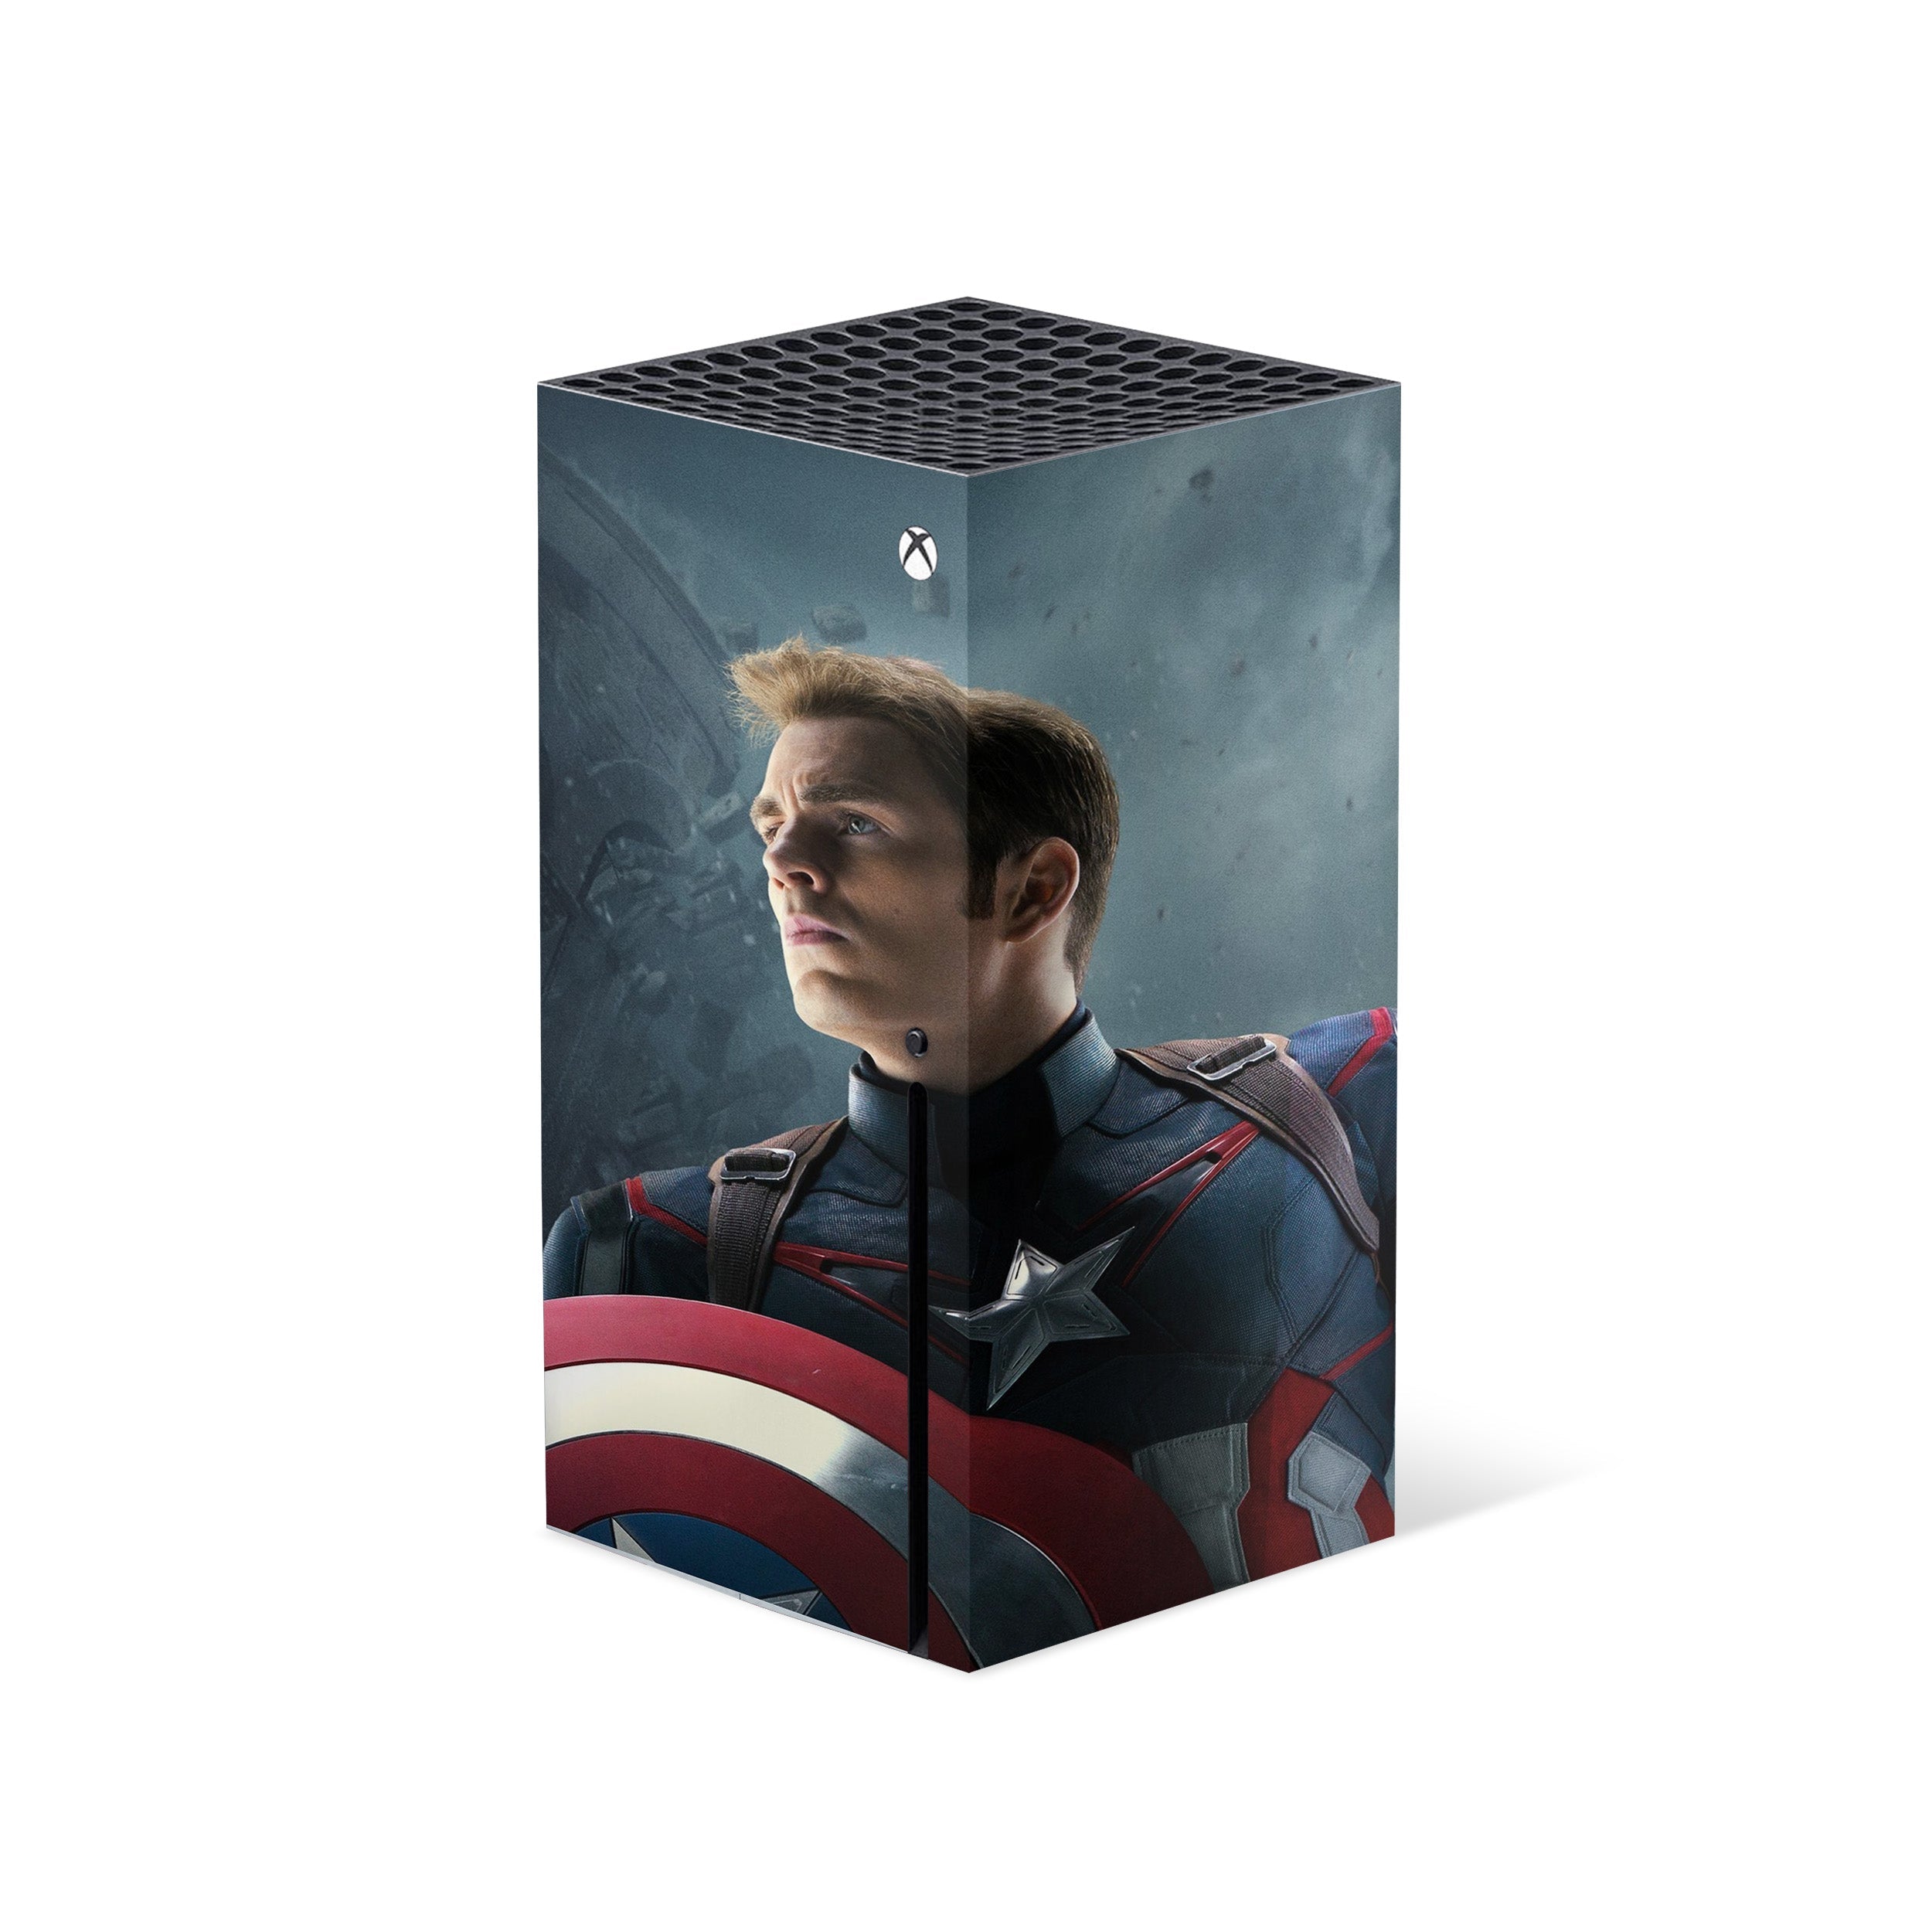 A video game skin featuring a Marvel Captain America design for the Xbox Series X.